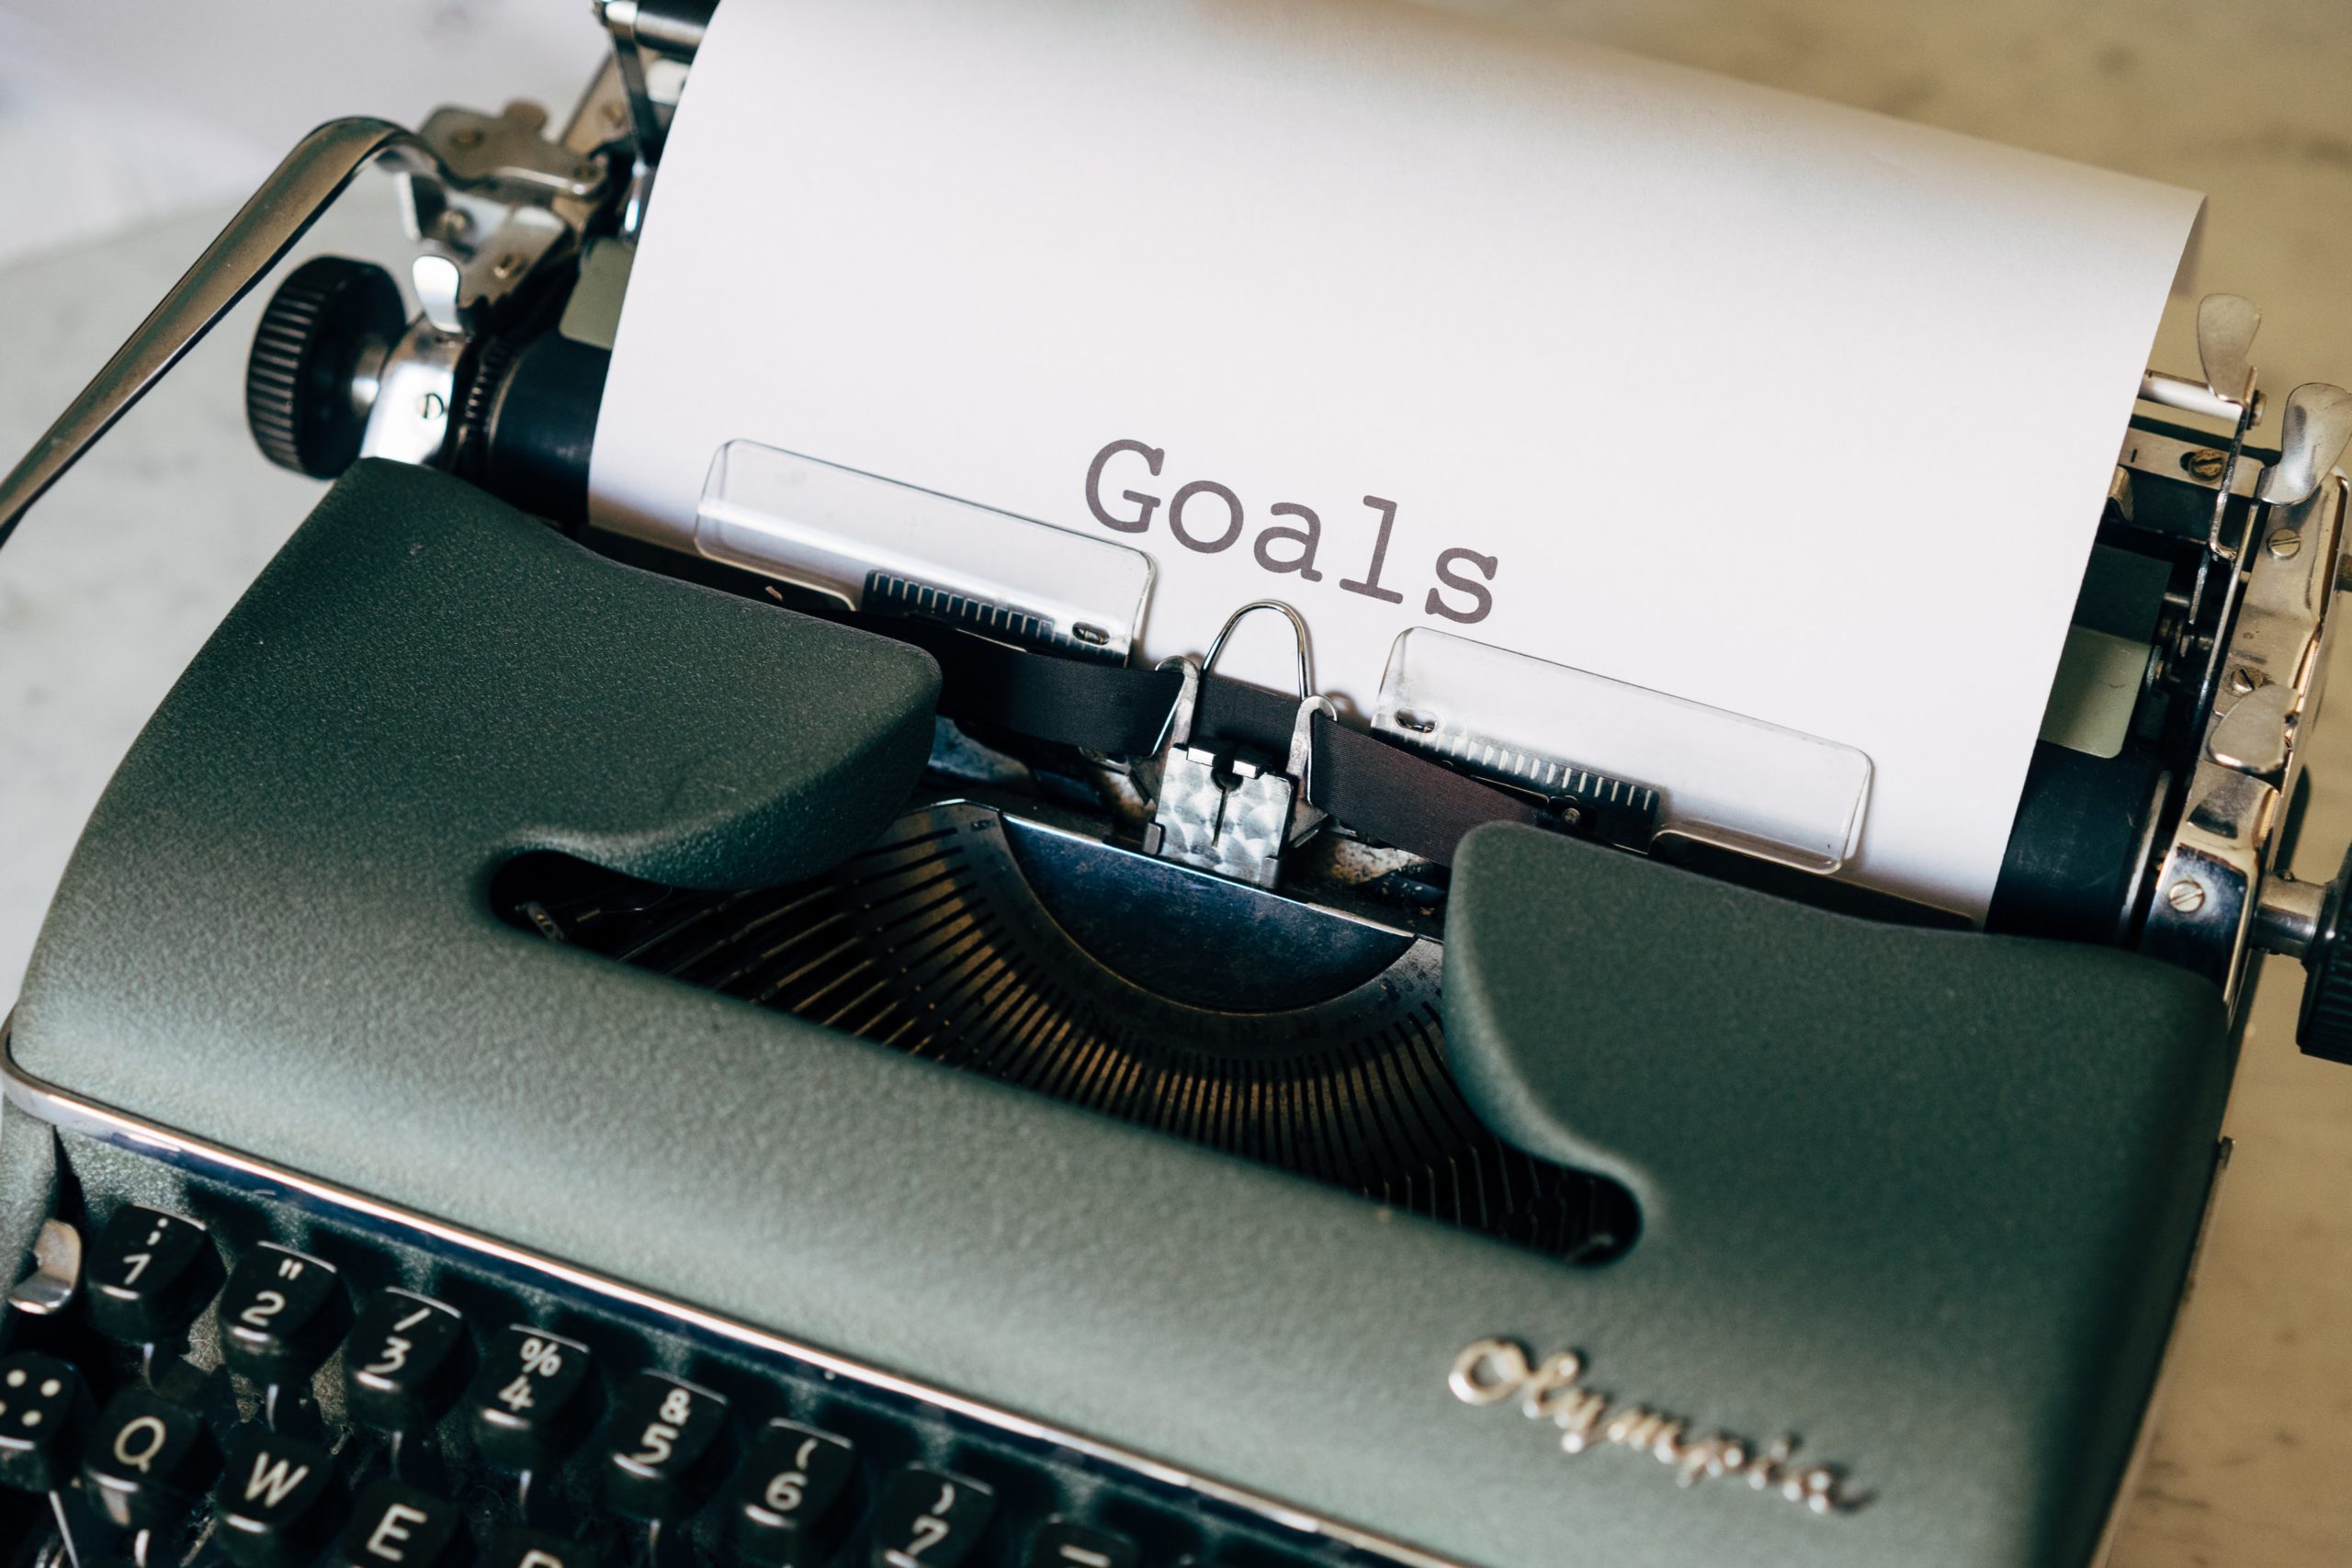 How to make sure your goals are S.M.A.R.T.